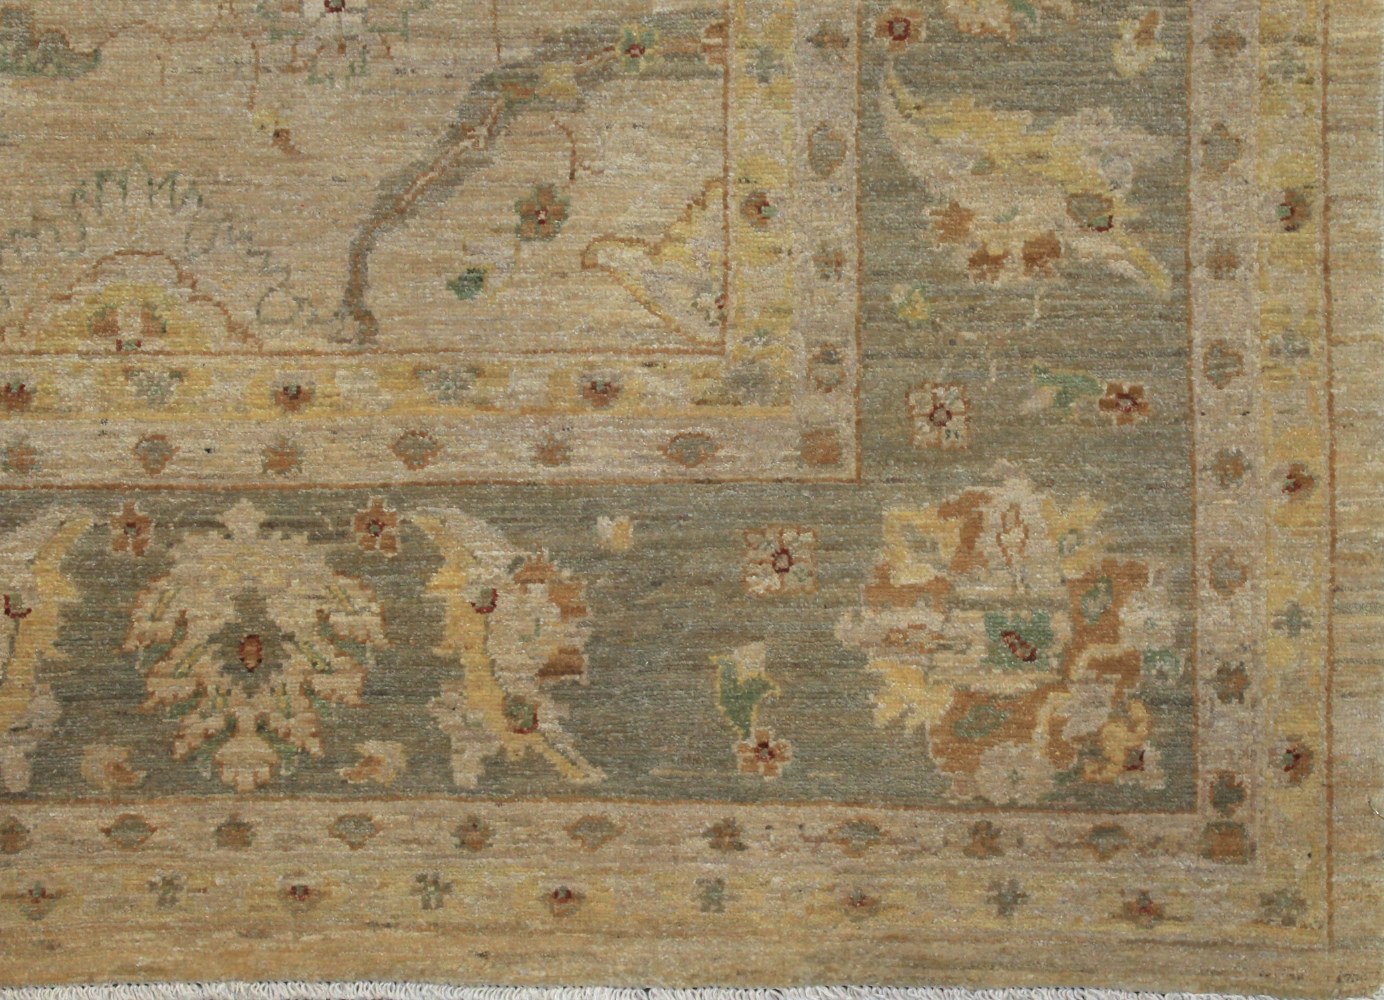 9x12 Peshawar Hand Knotted Wool Area Rug - MR14490